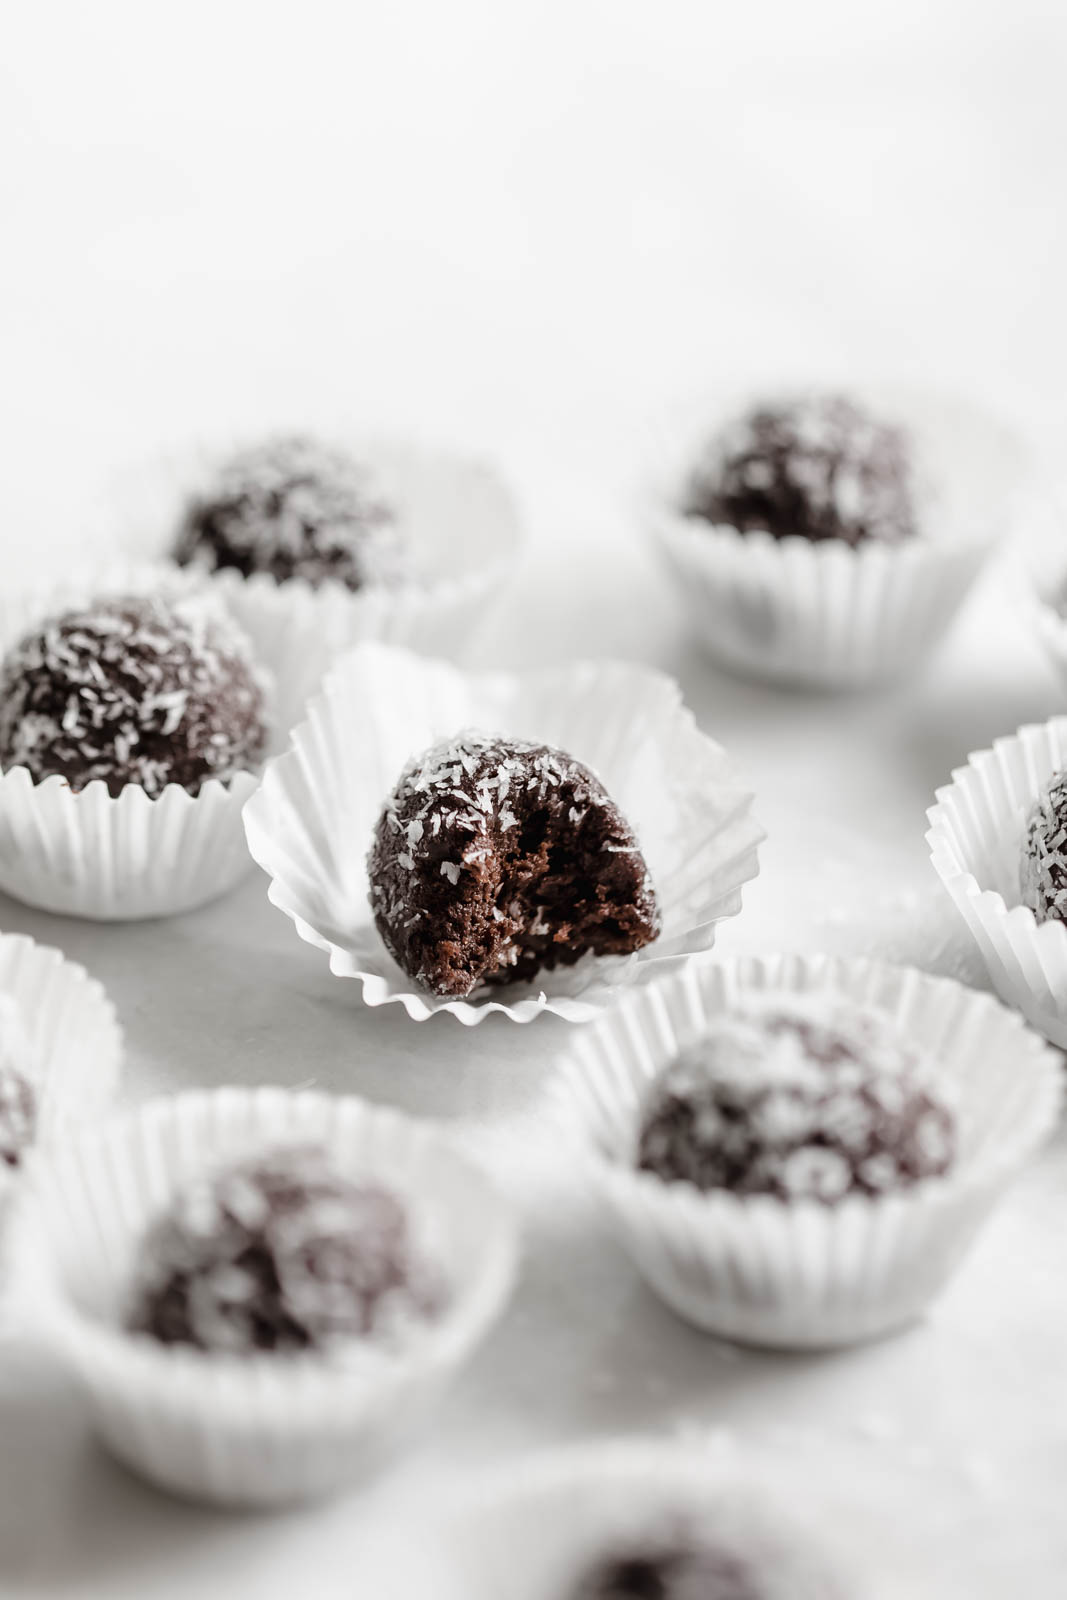 chocolate date balls in paper wrappers